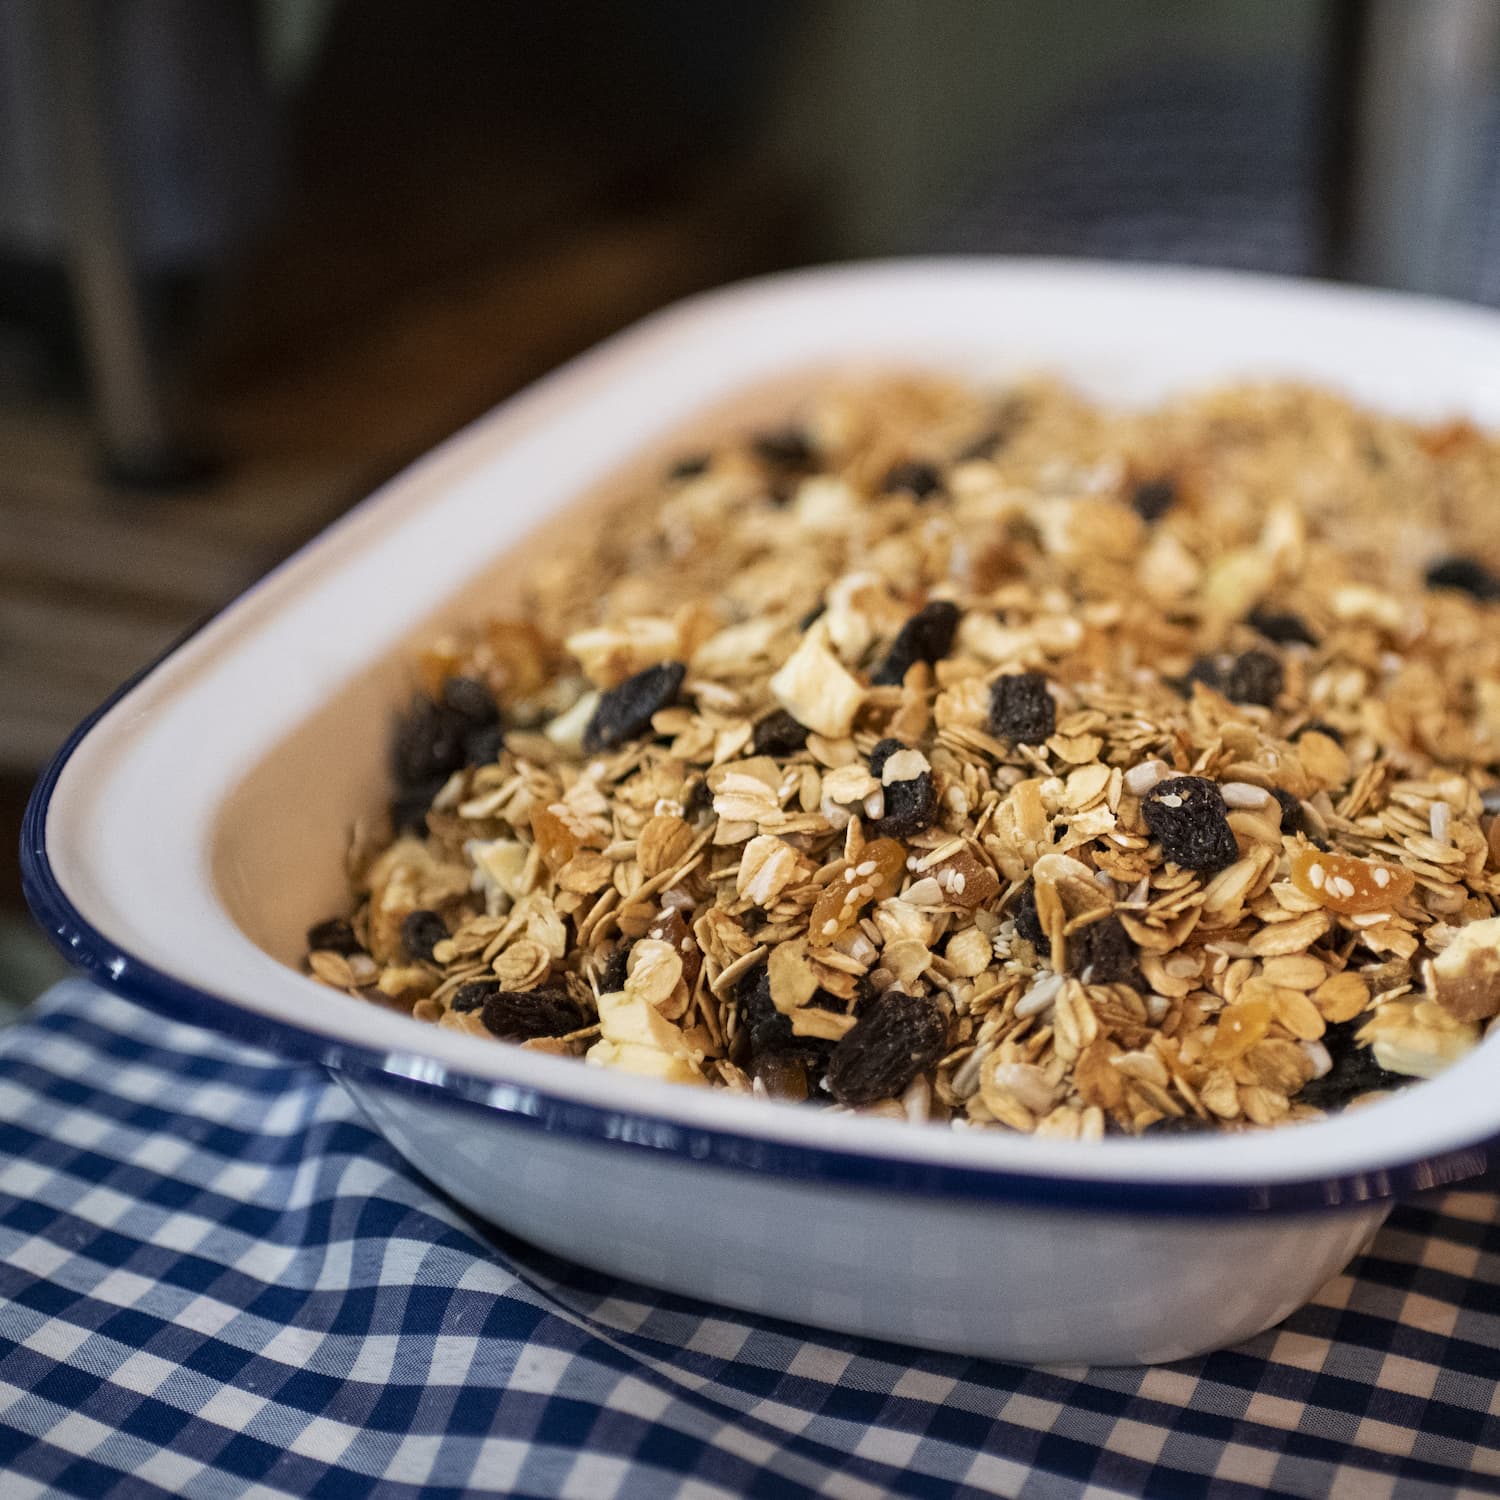 Home-made toasted muesli in white enamel bowl